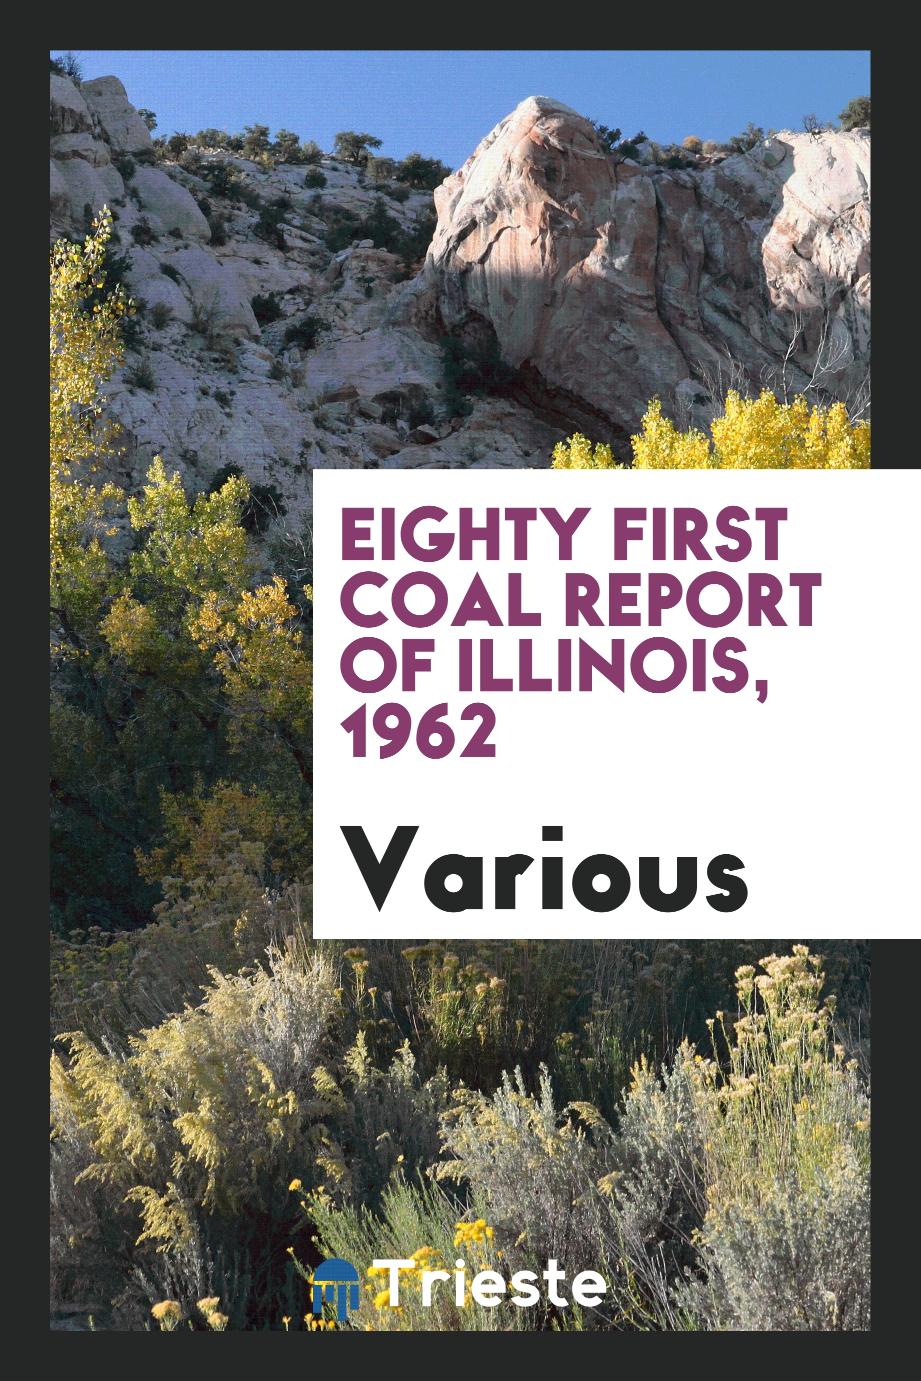 Eighty first Coal report of Illinois, 1962